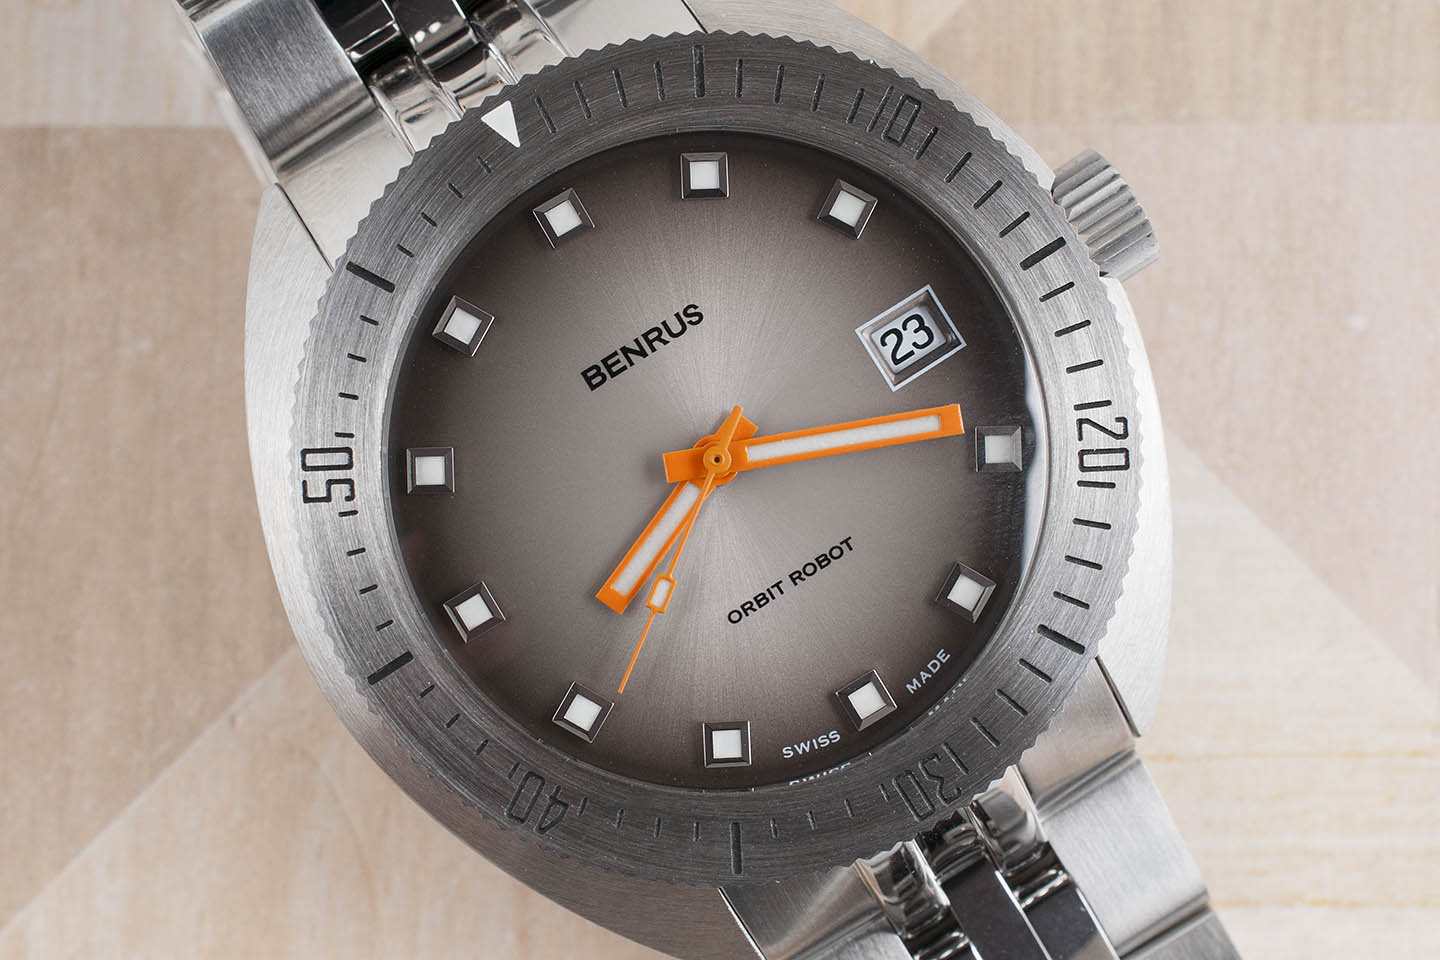 Benrus wristalarm, is it from the 60's or 70's | WatchUSeek Watch Forums